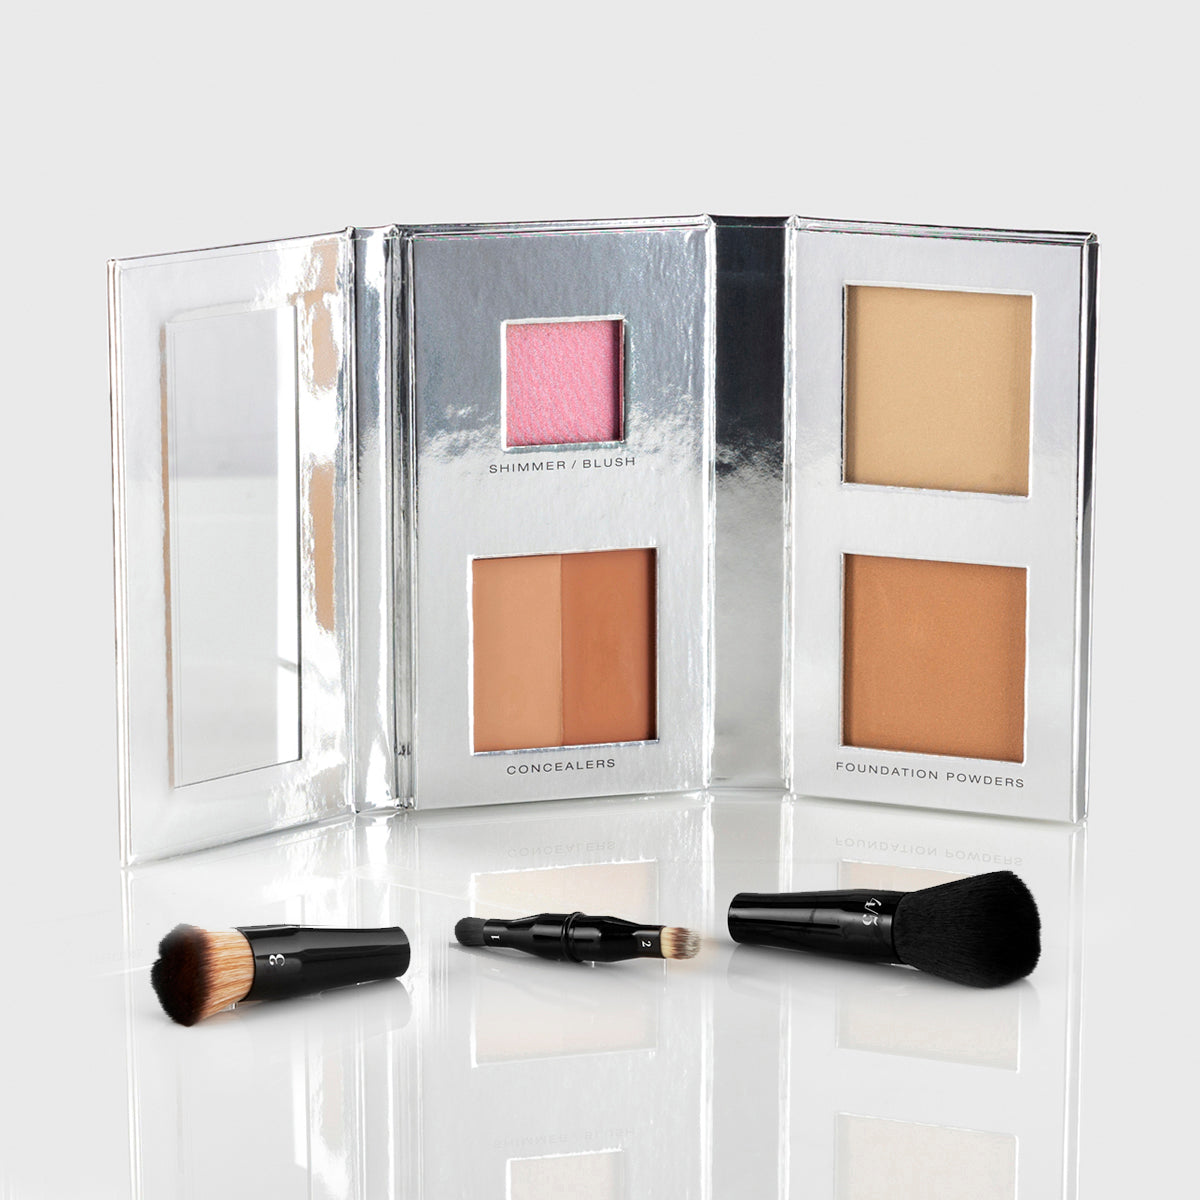 a silver makeup palette with mirrored flap and 1 blush, 2 concealers and 2 foundation powers in medium shades; a black, travel-sized nesting brush set is splayed out in front of the palette